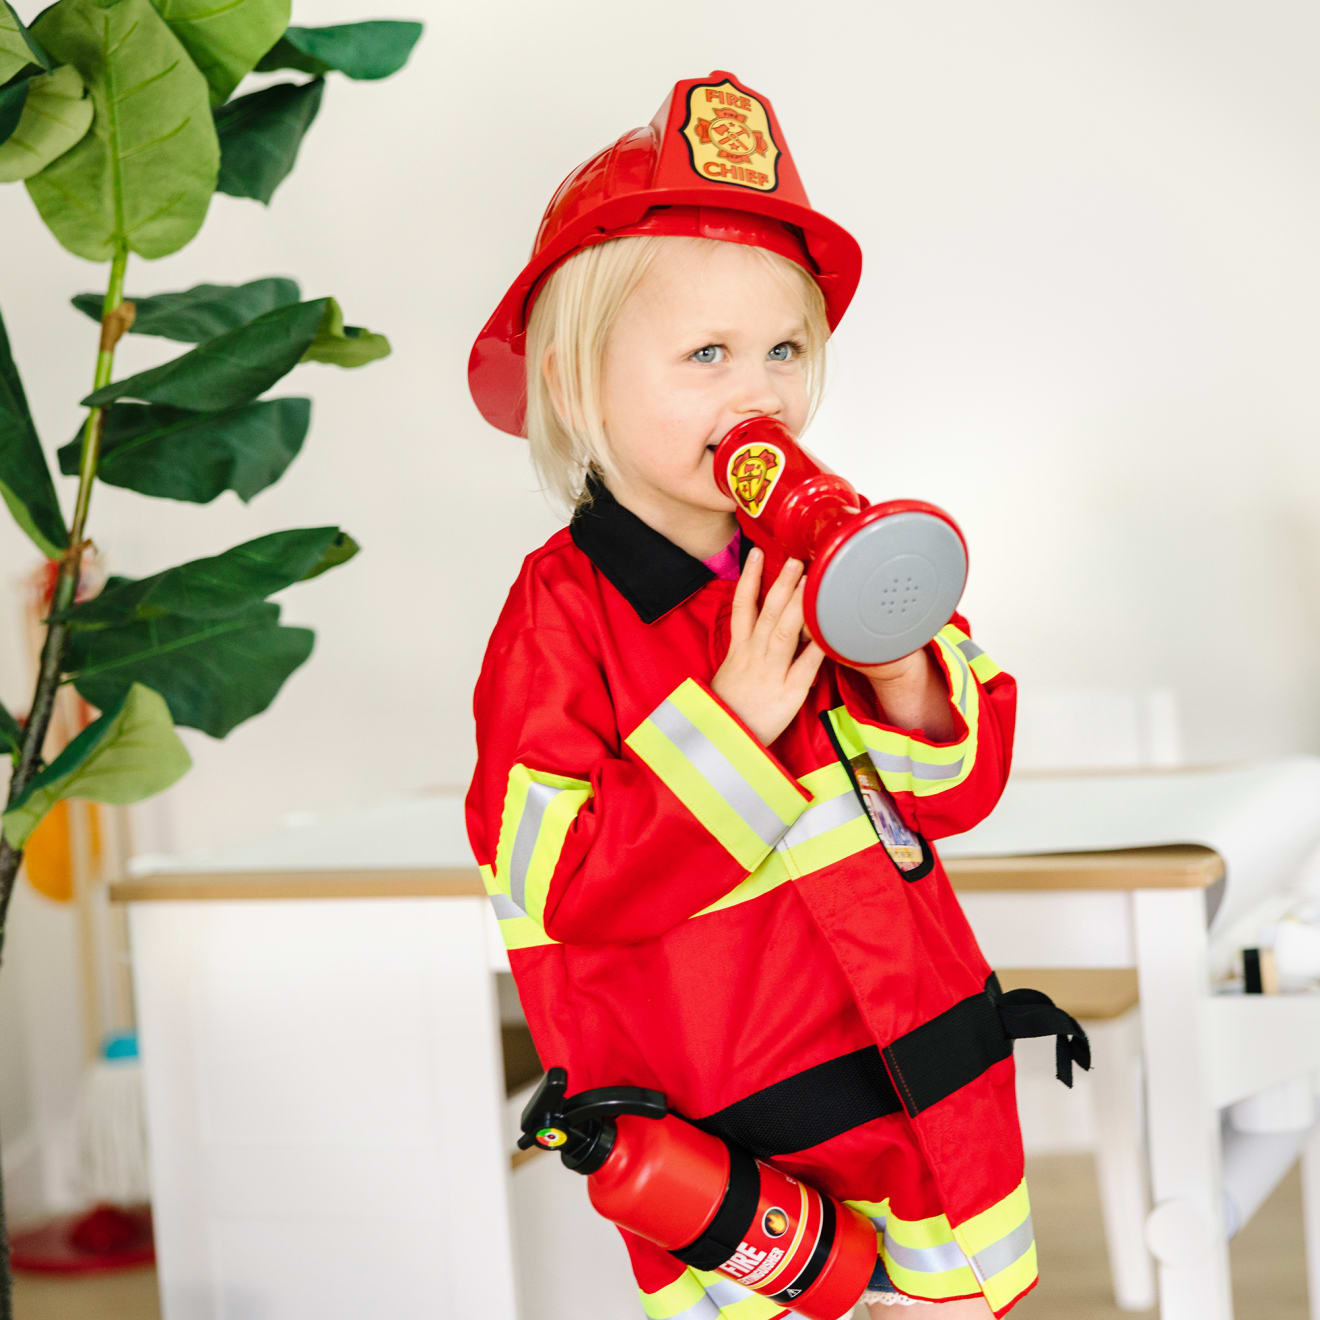 Firefighter Costume Set | Firefighter Role Play Outfit